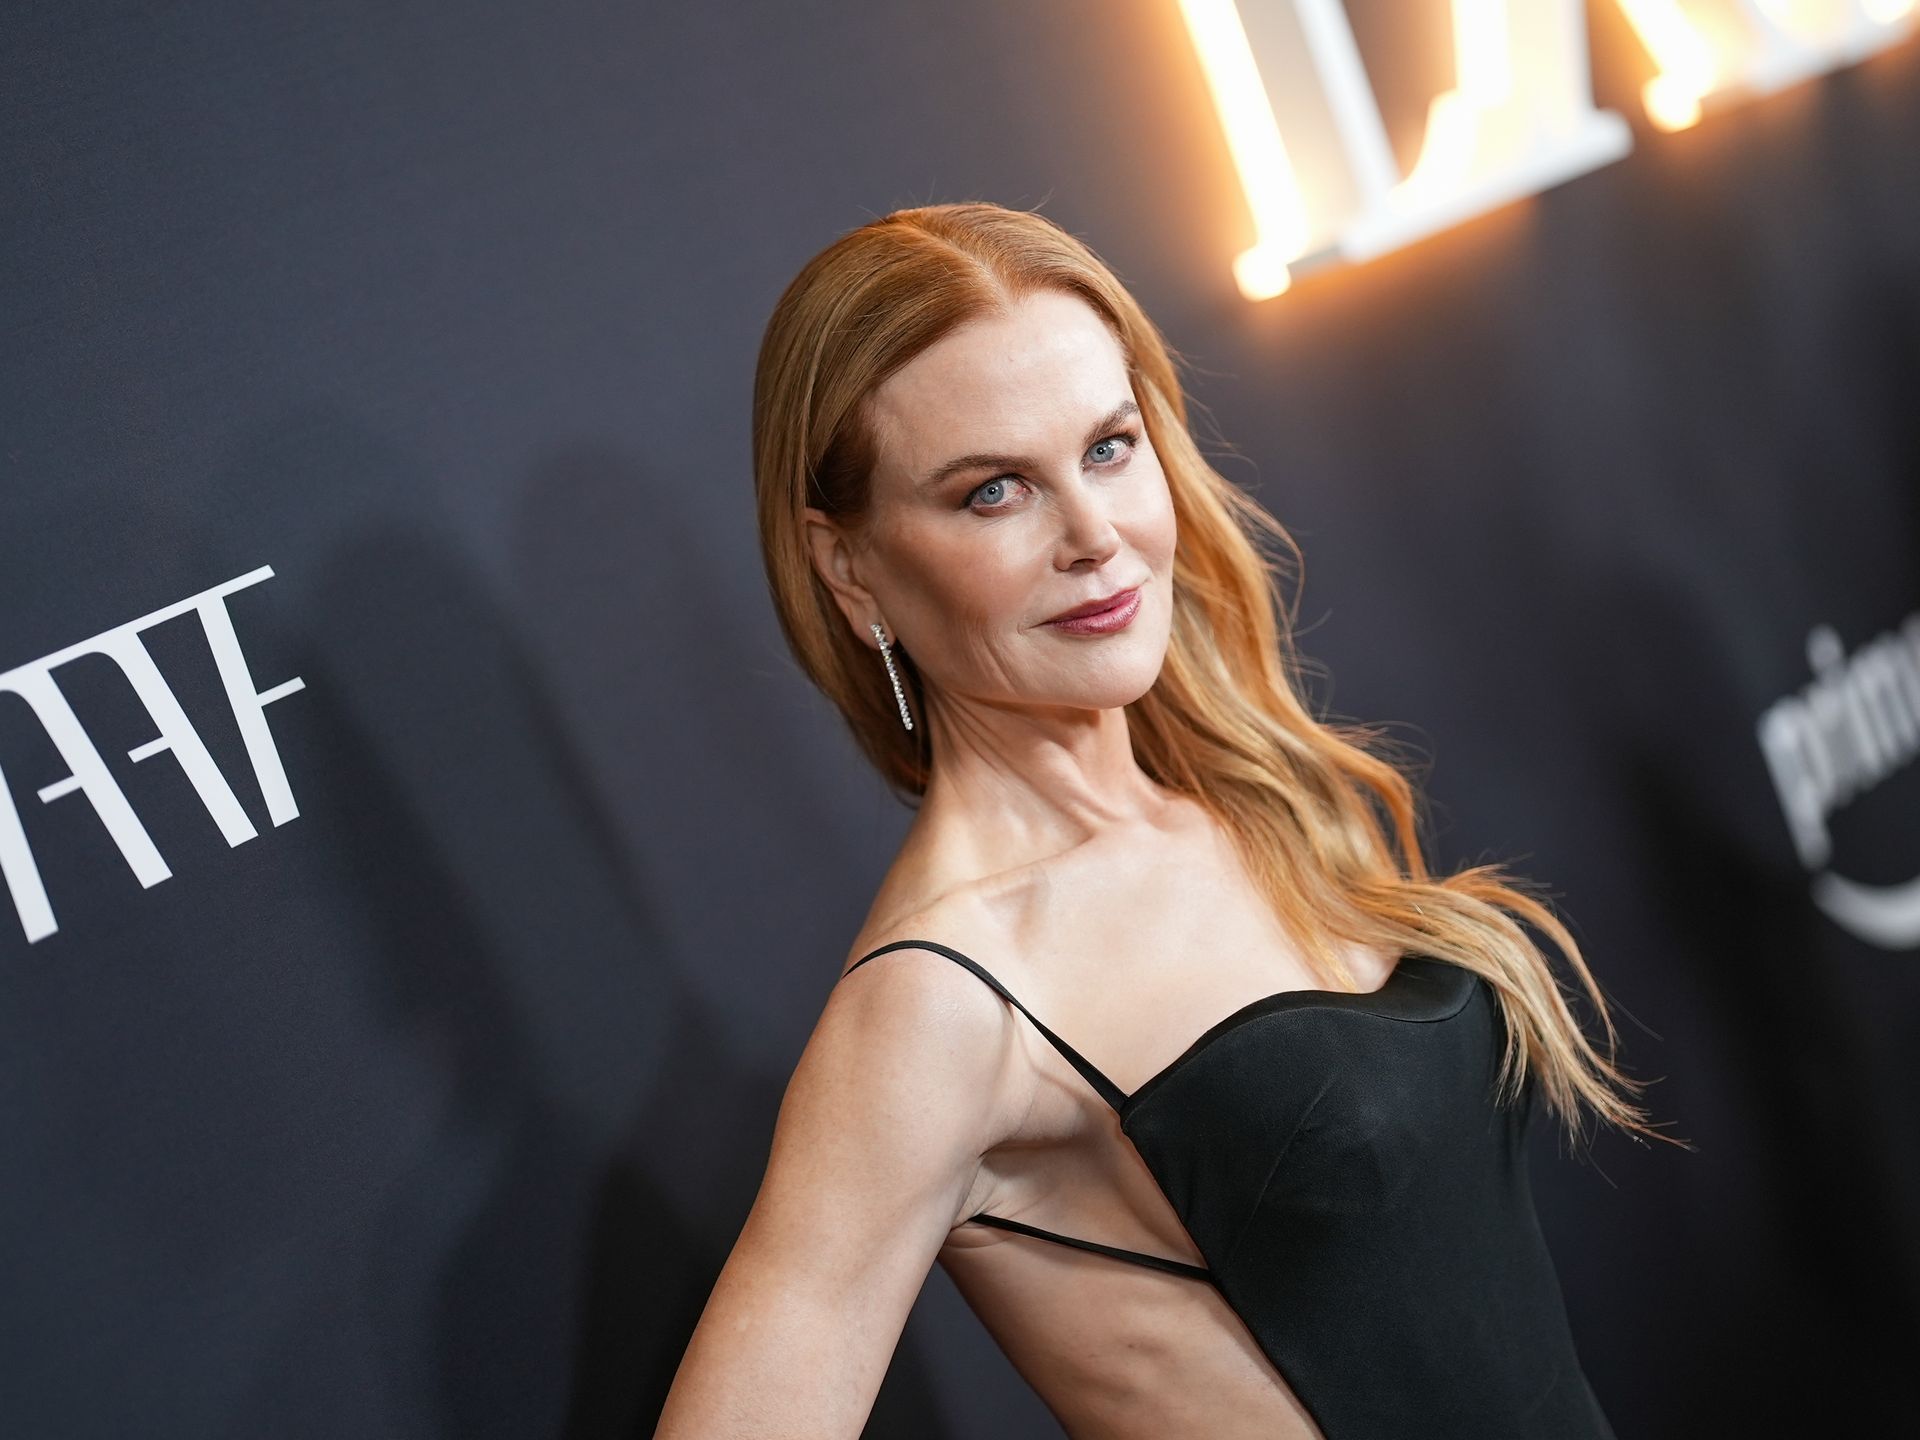 Nicole Kidman, 56, showcases amazingly muscular physique in revealing dress  